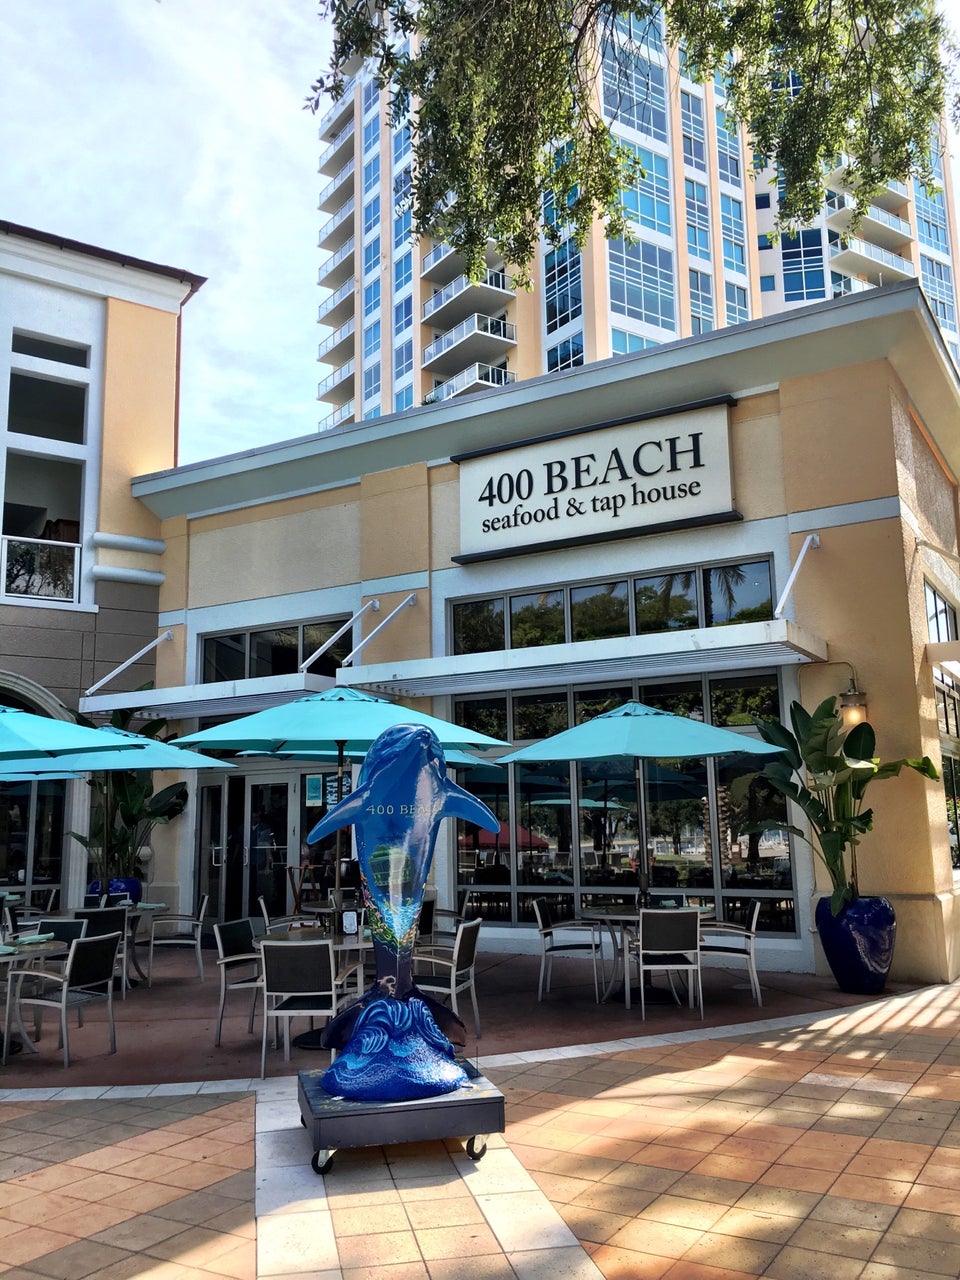 Photo of 400 Beach Seafood & Tap House